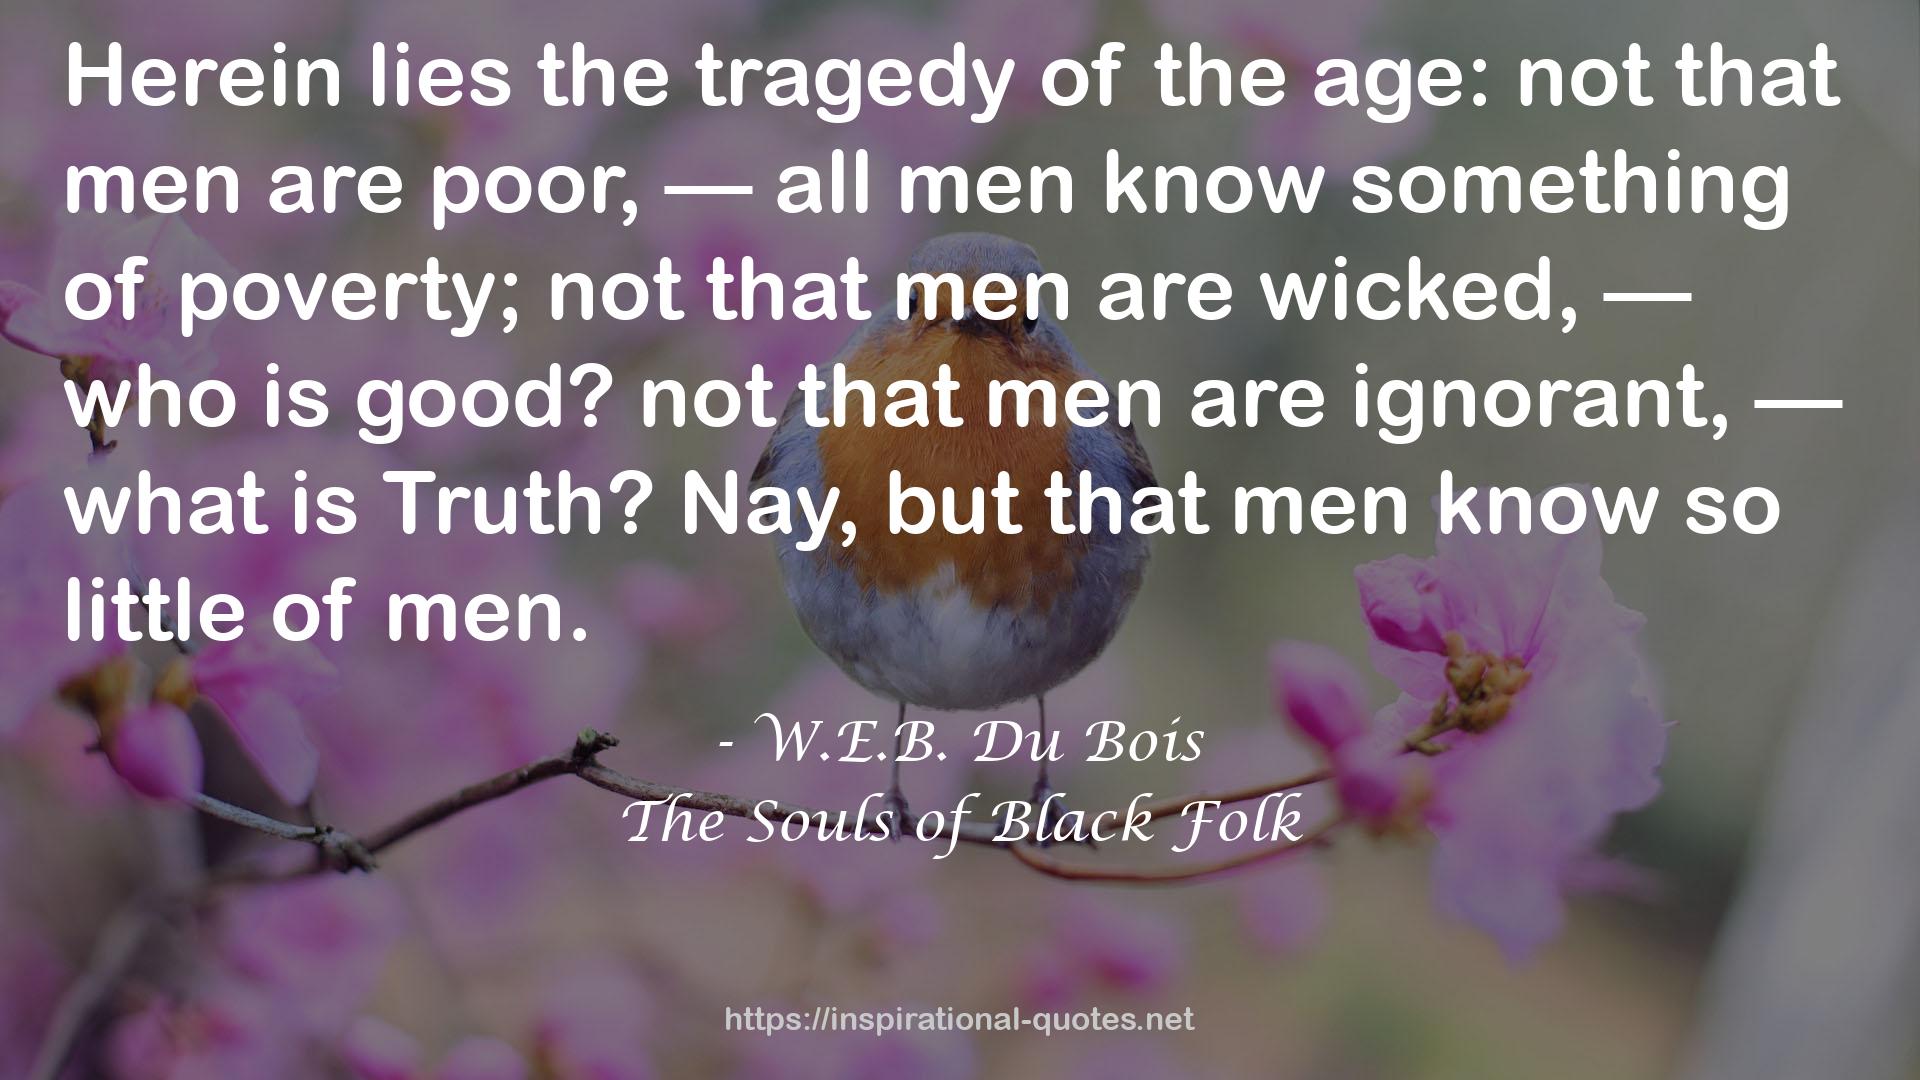 The Souls of Black Folk QUOTES